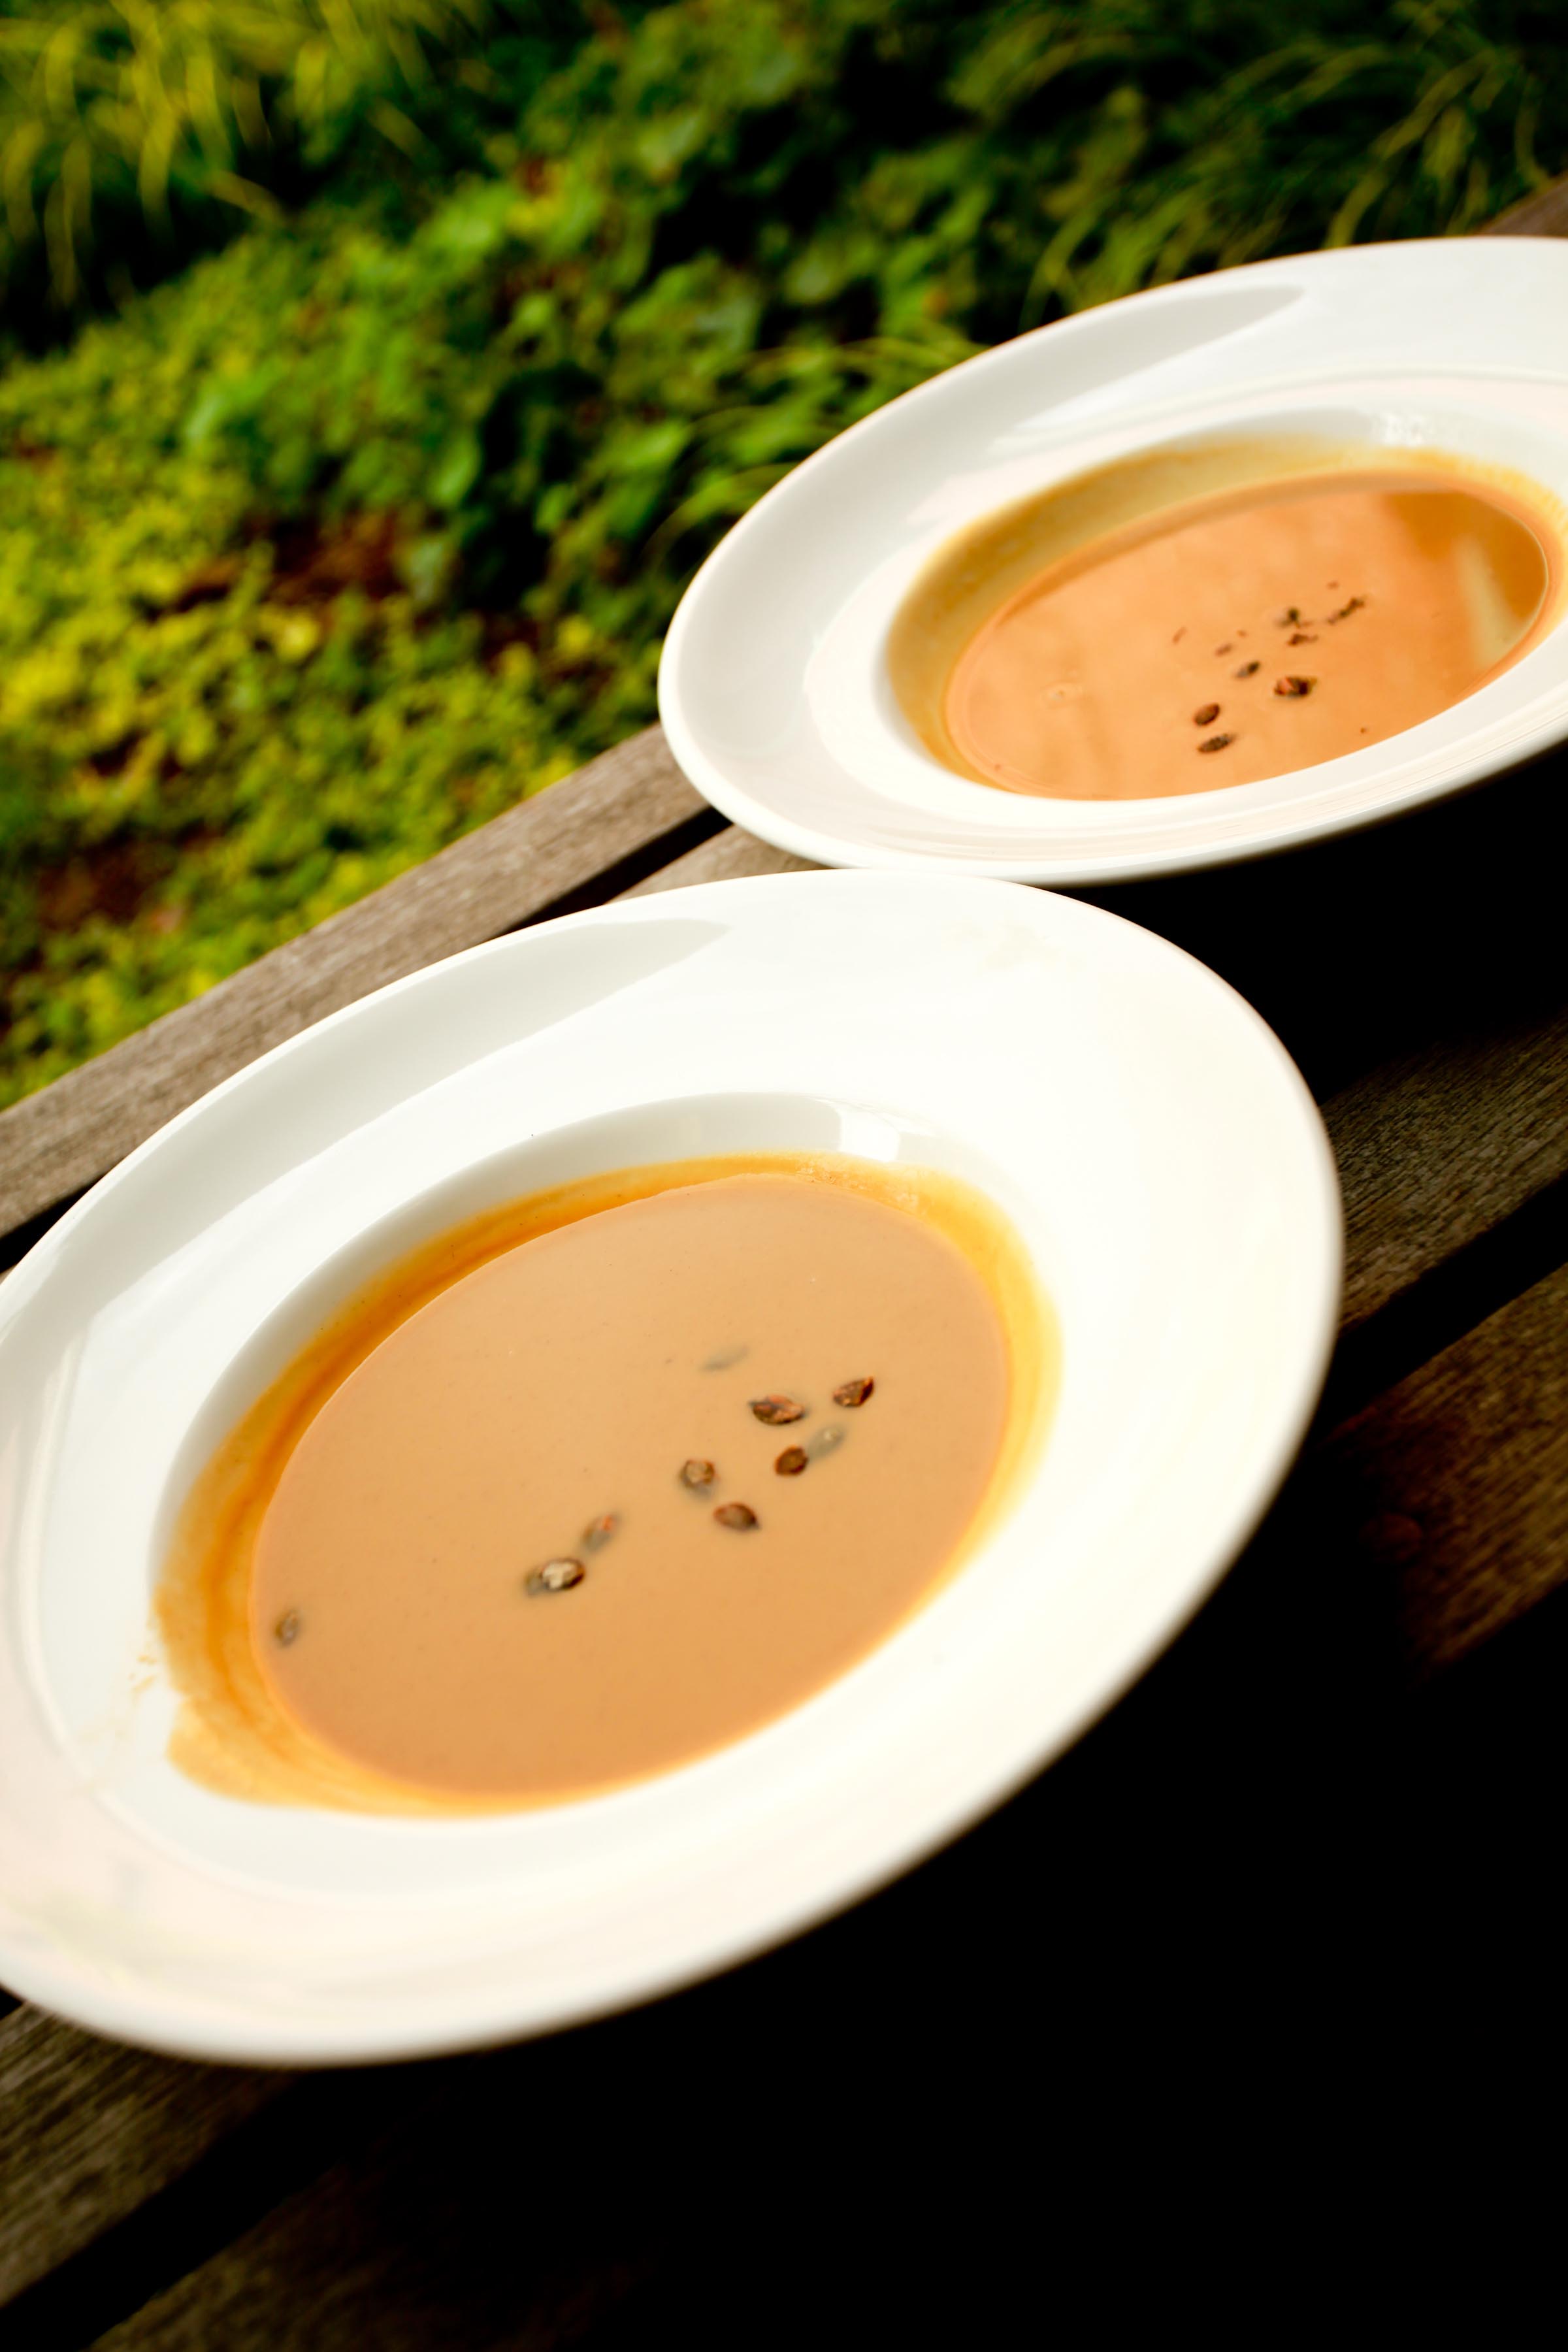 Windows Catering Company squash and apple bisque at Meadowlark